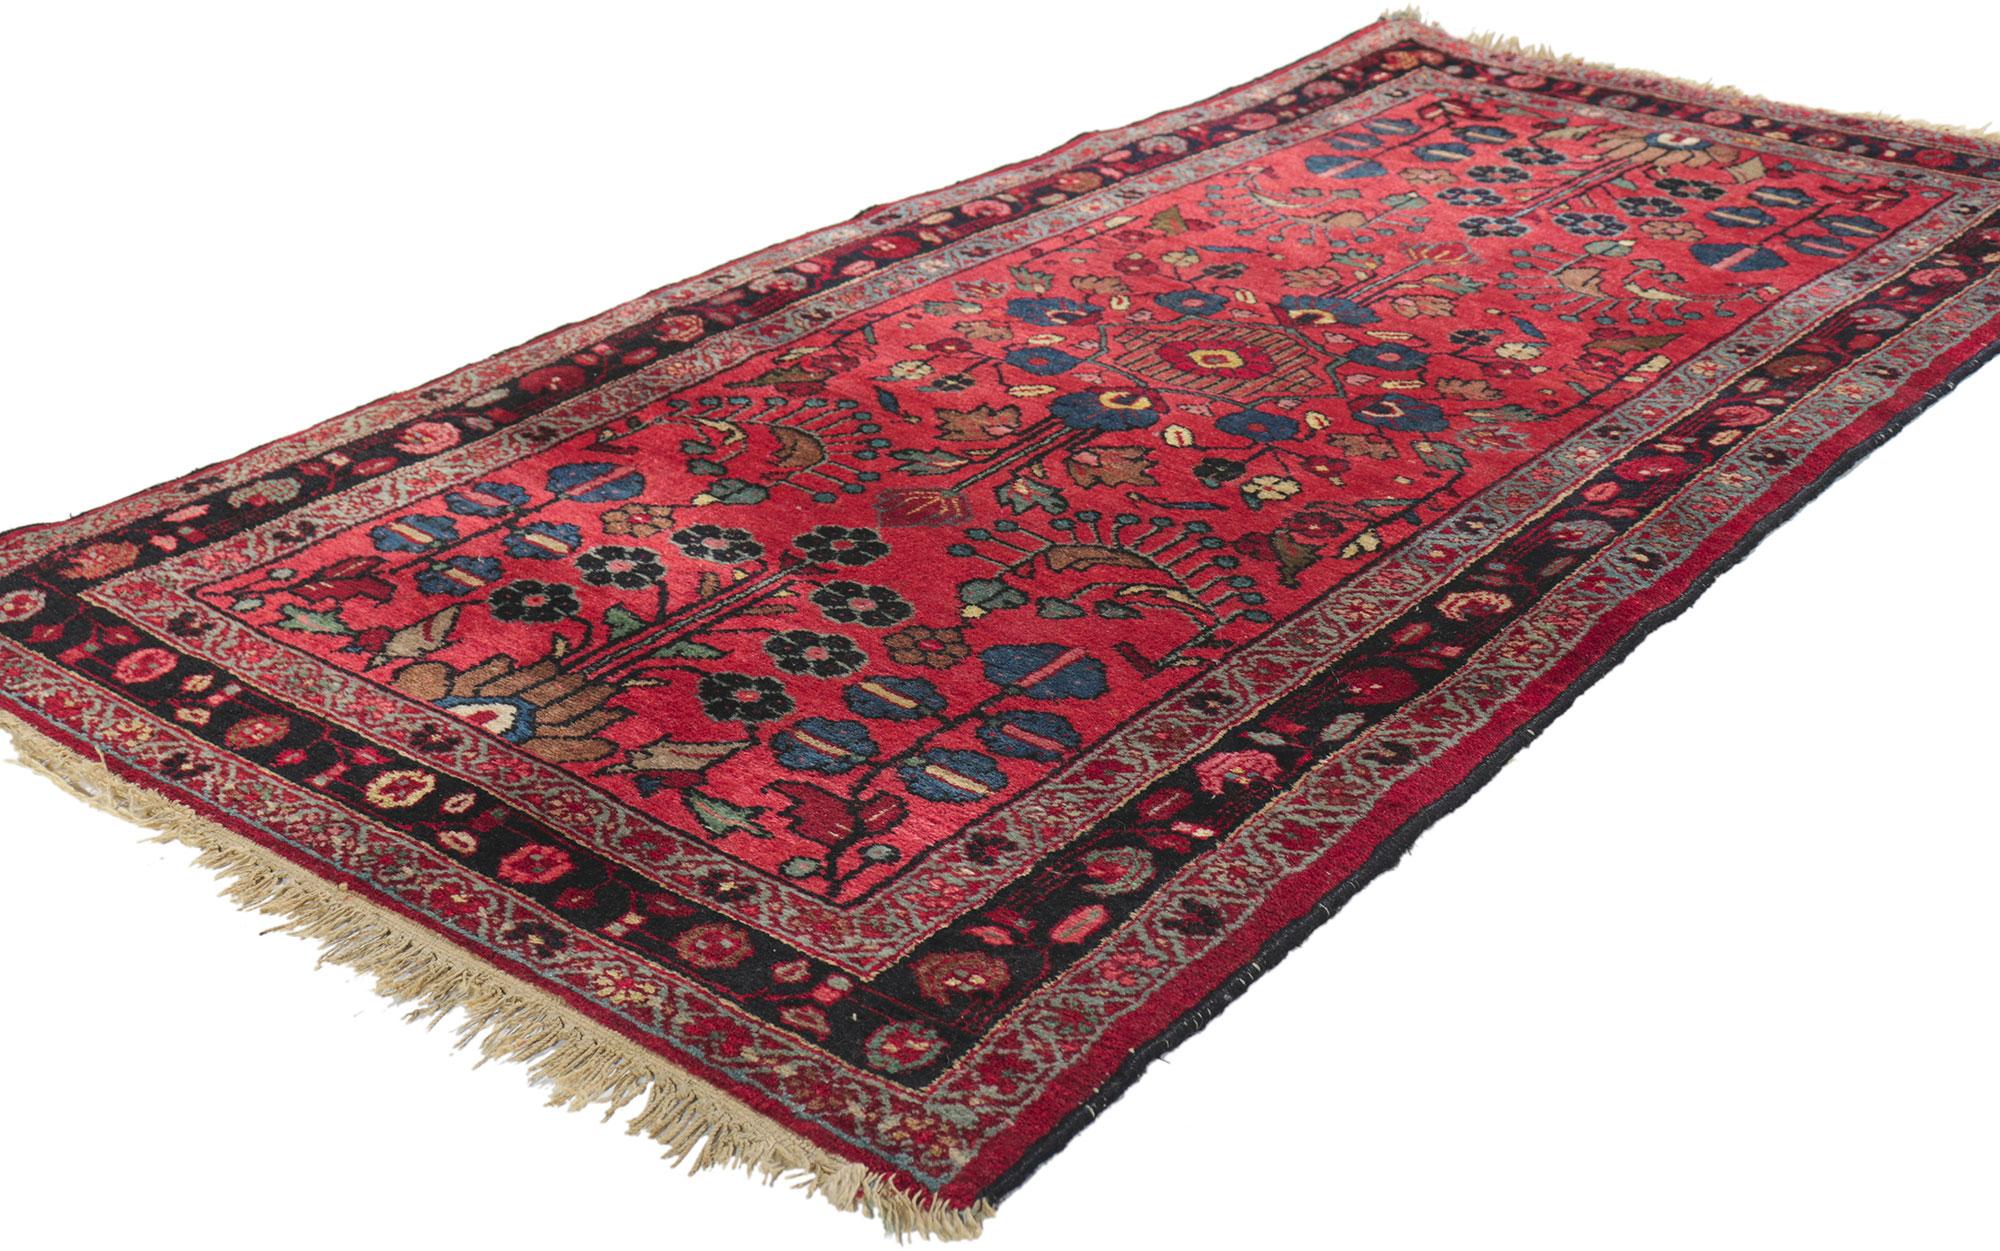 78418 Antique Persian Lilihan Rug, 02'06 x 04'09. With its timeless design, incredible detail and texture, this hand knotted wool antique Persian Lilihan rug is poised to impress. The eye-catching stylized floral pattern and saturated color palette